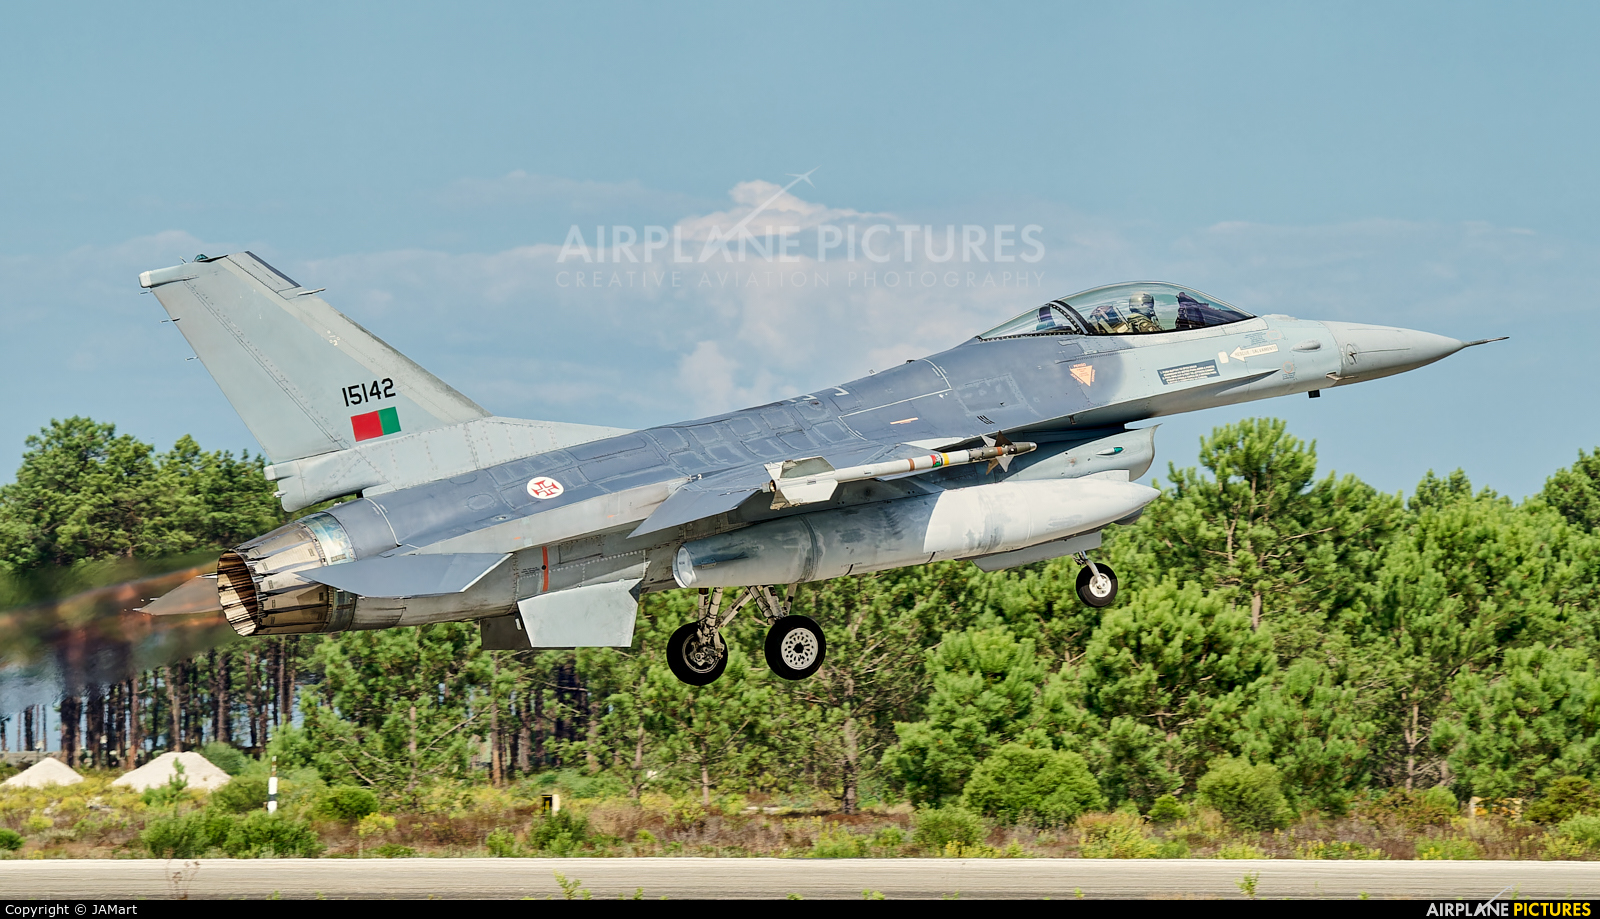 Portugal - Air Force 15142 aircraft at Monte Real